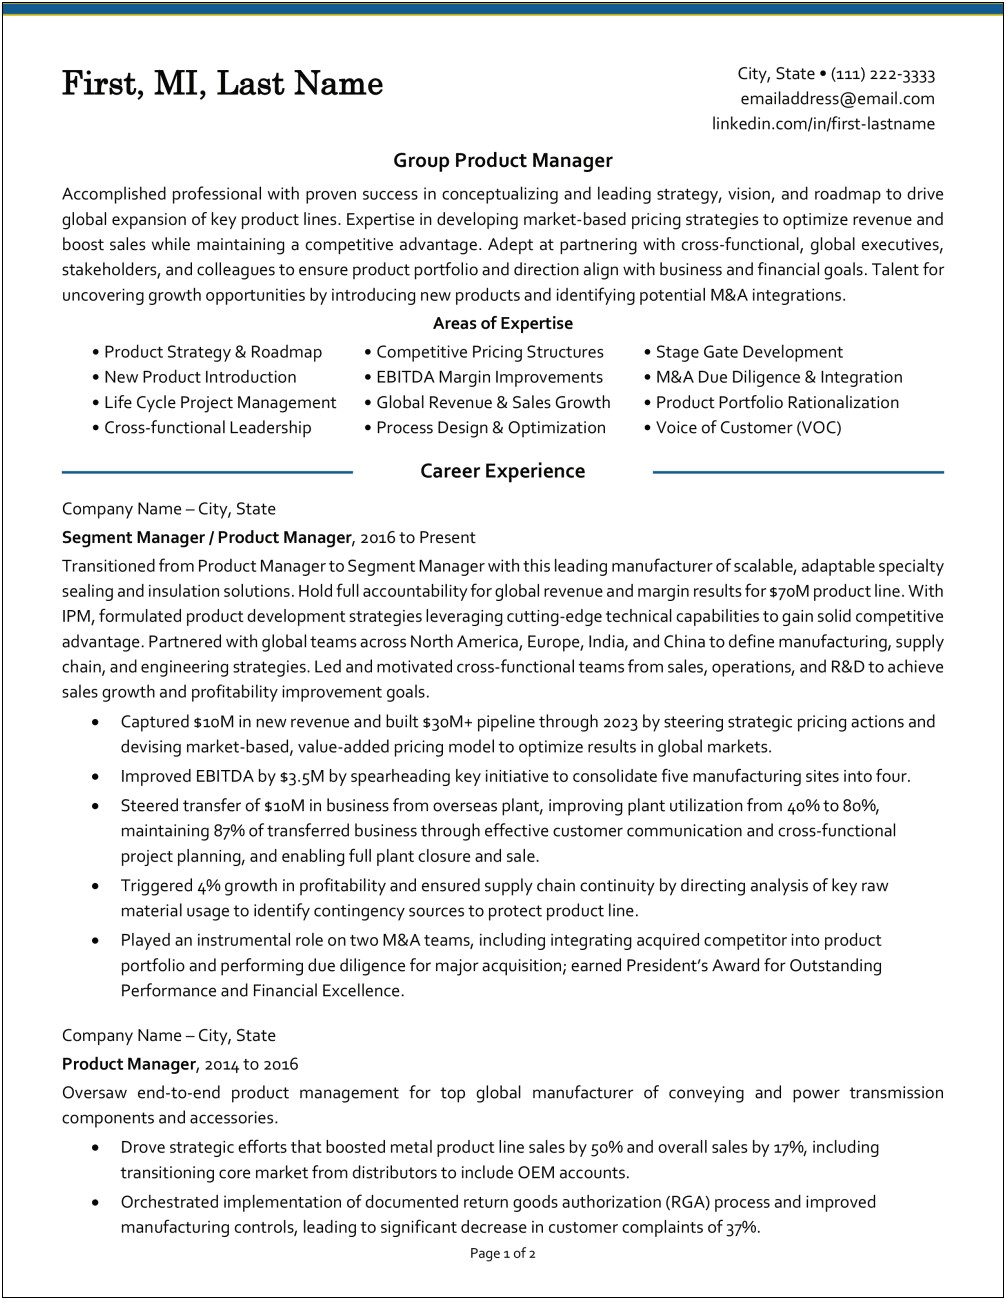 Example Of Professional Resumes Formatting